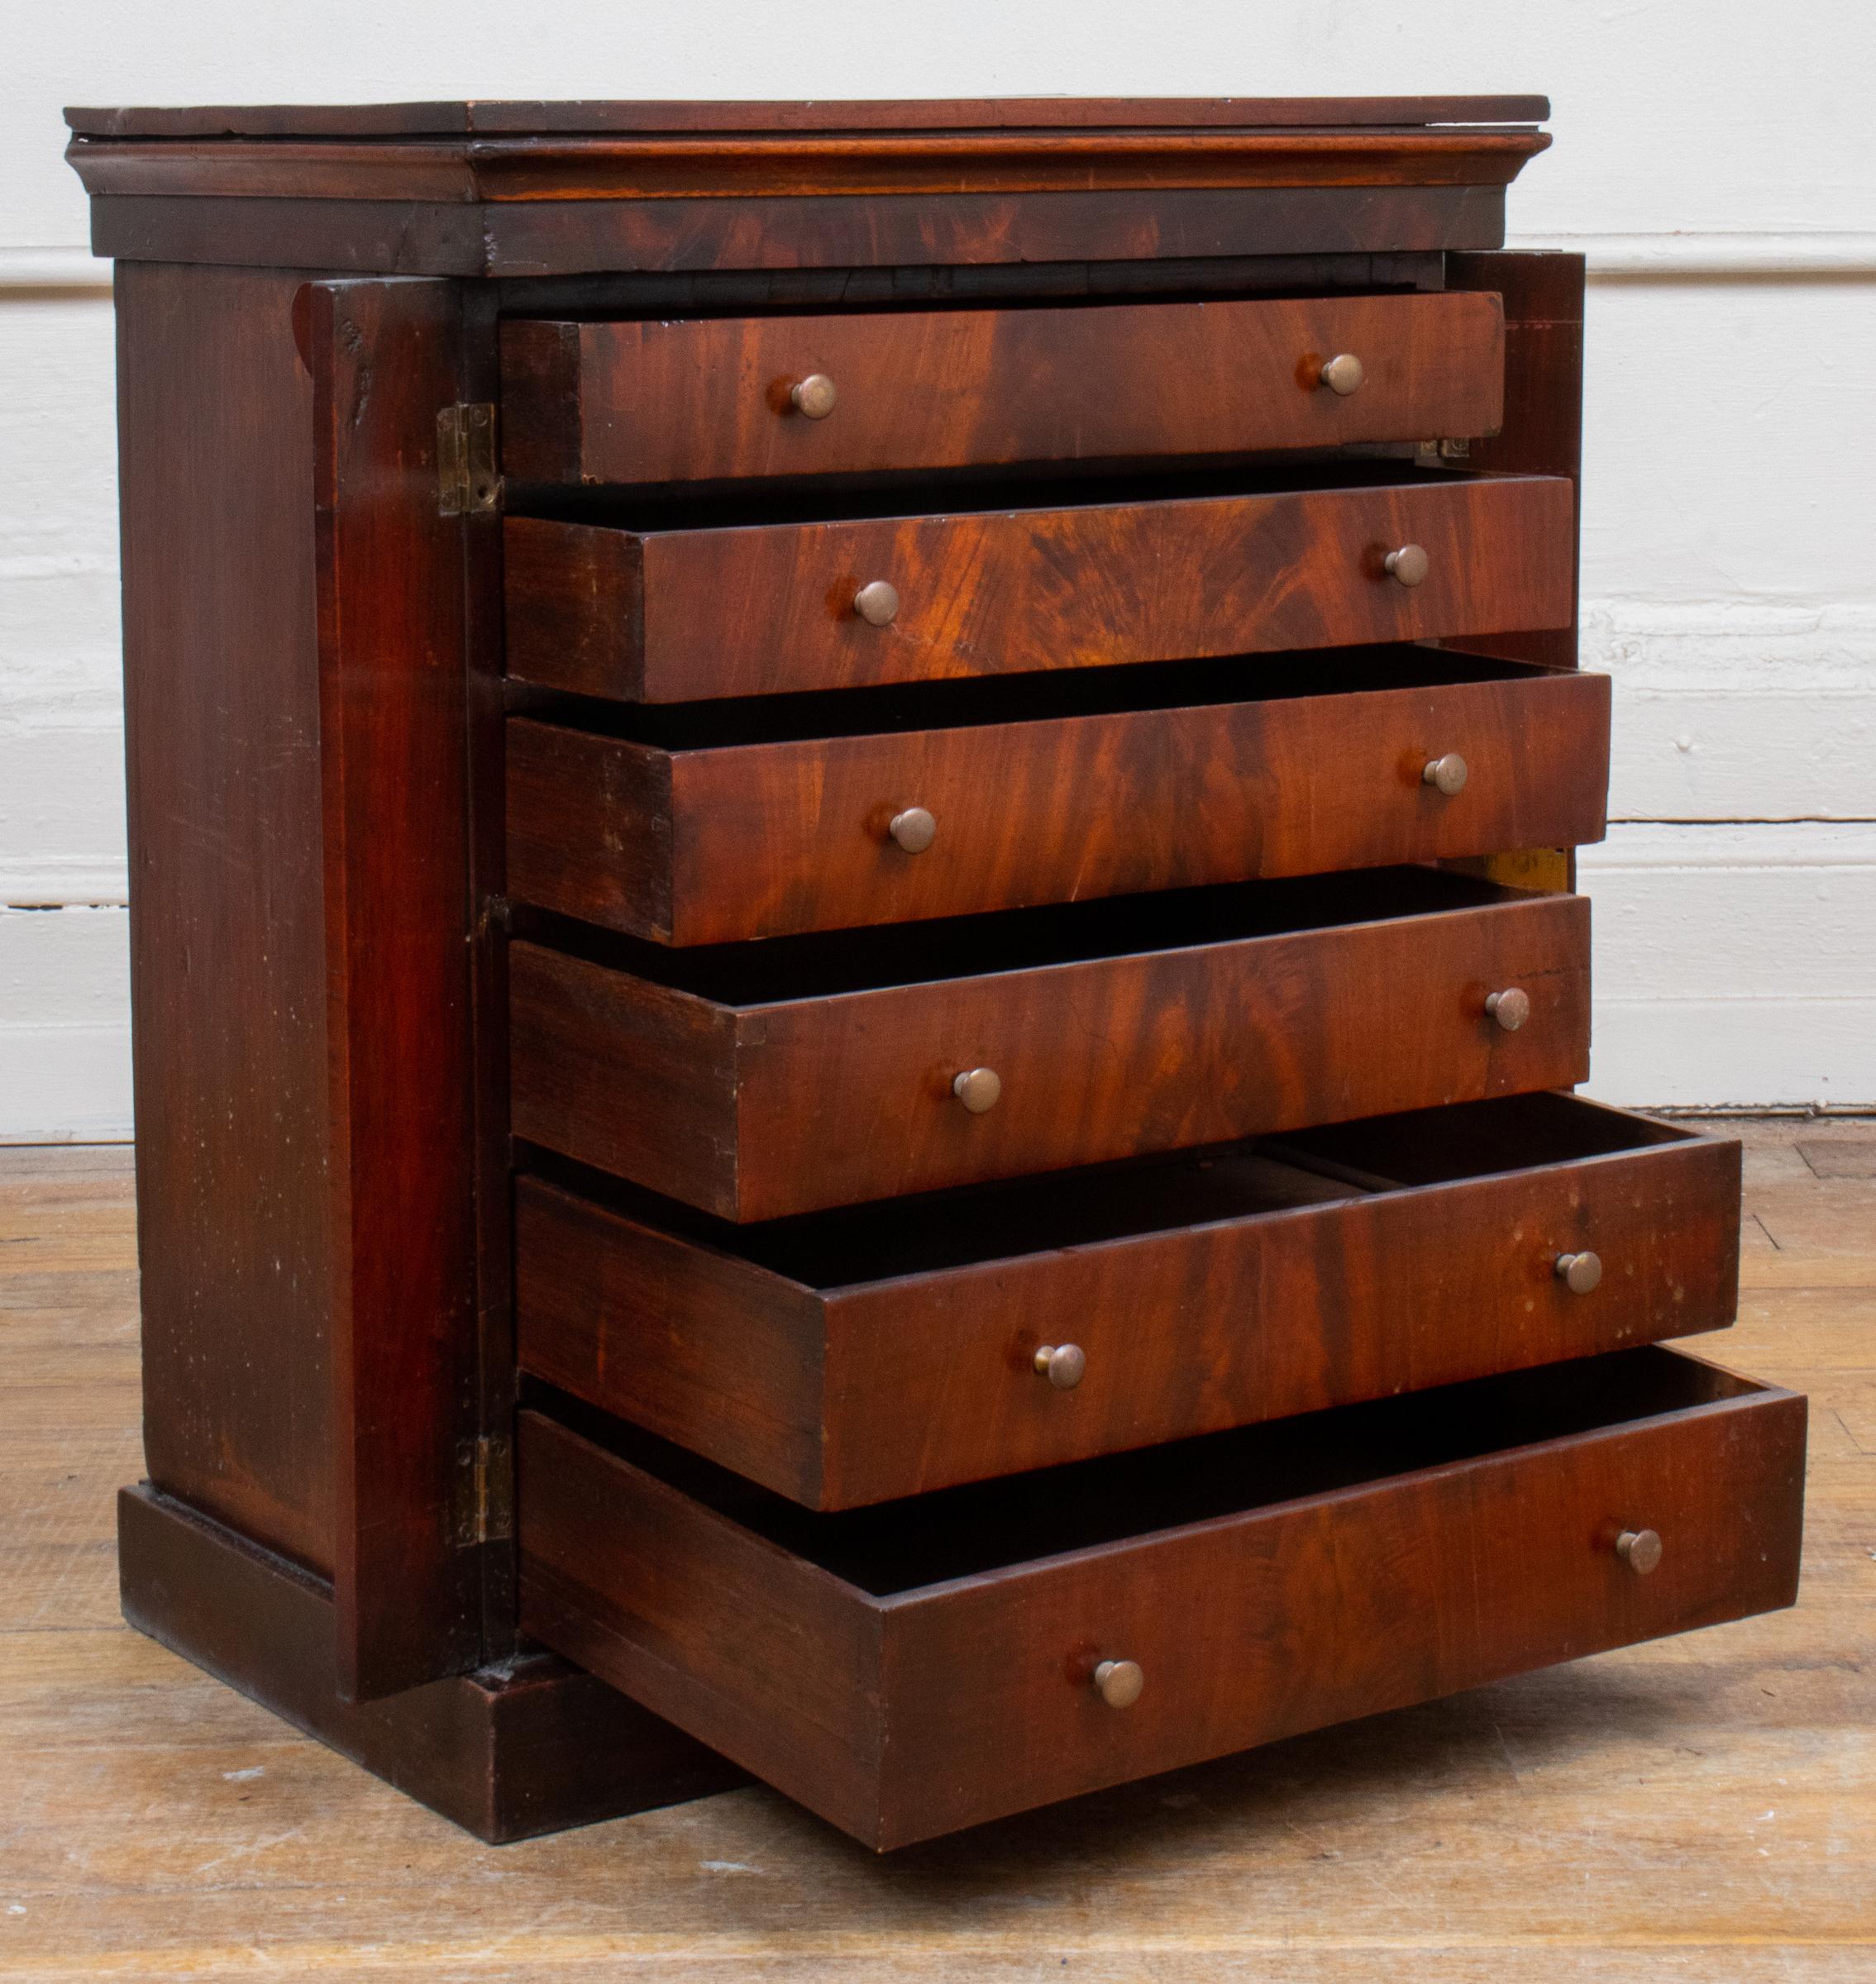 European Empire Style Diminutive Flame Mahogany Chest of Drawers